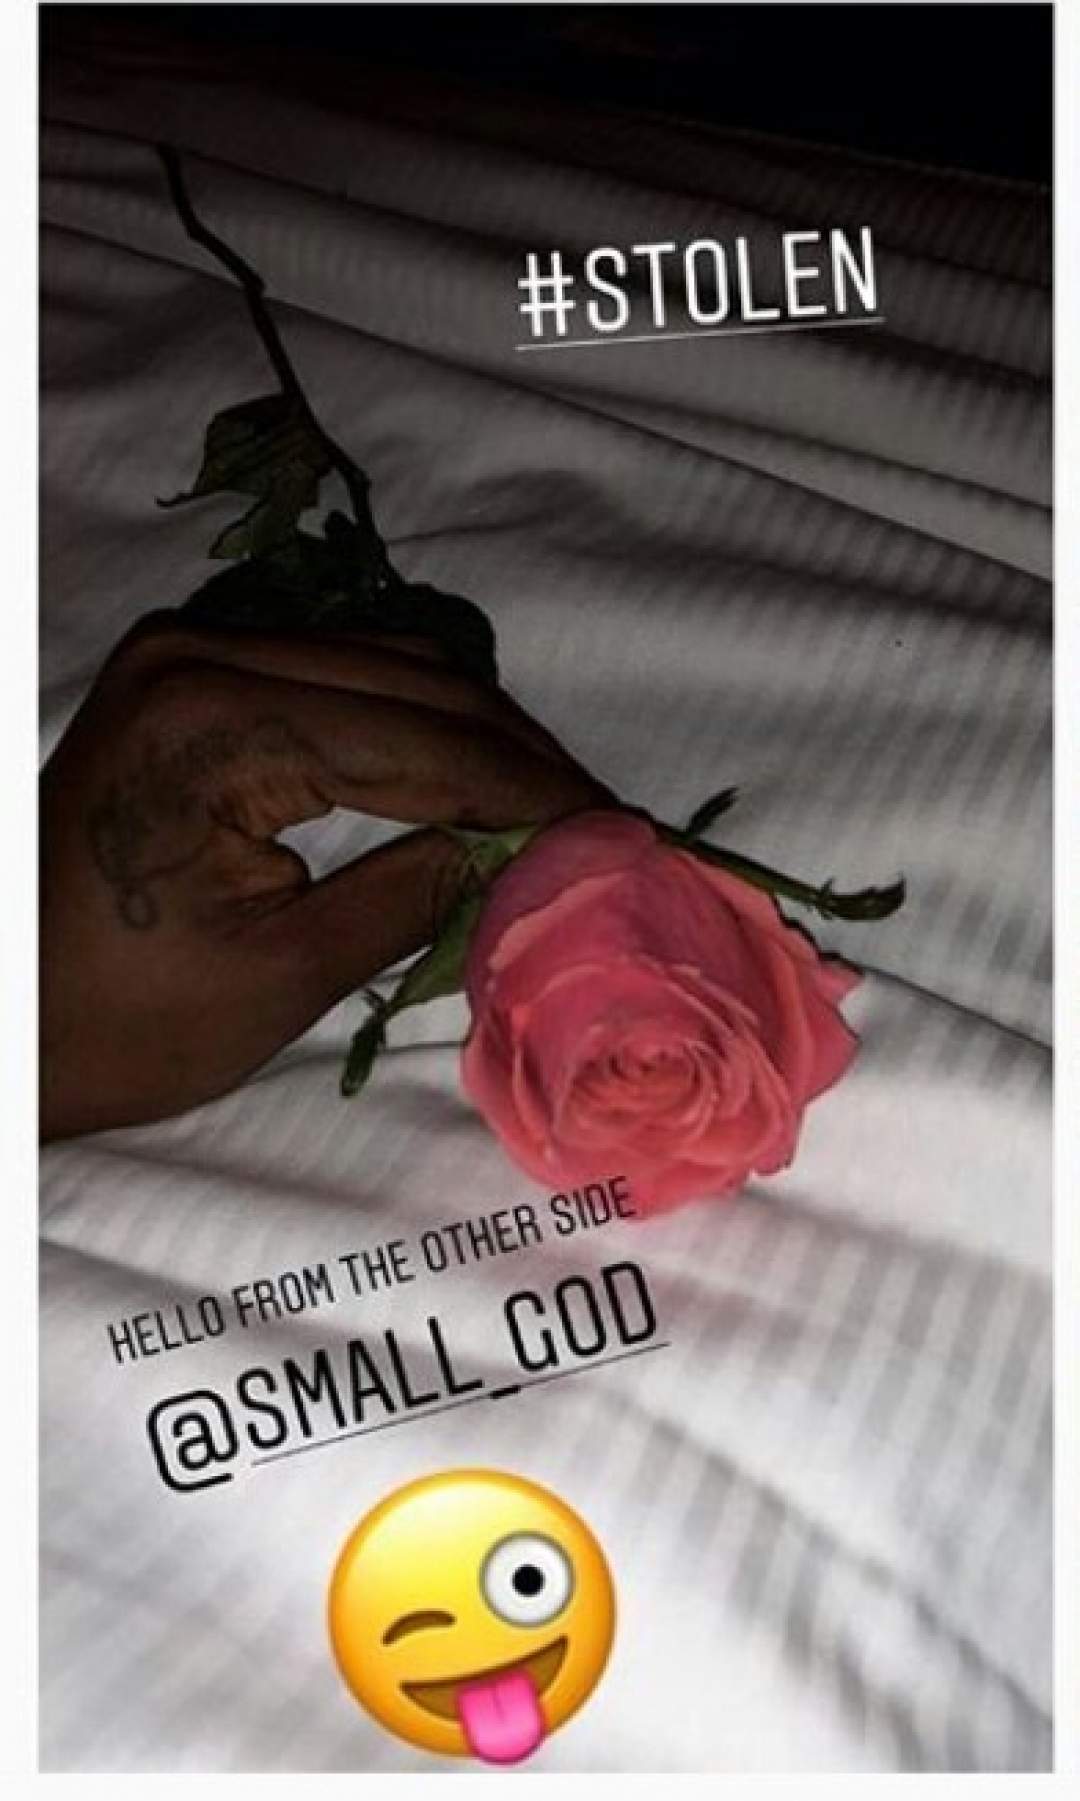 Tiwa Savage Flaunts The Gift Her New Boo Got Her (Photos)